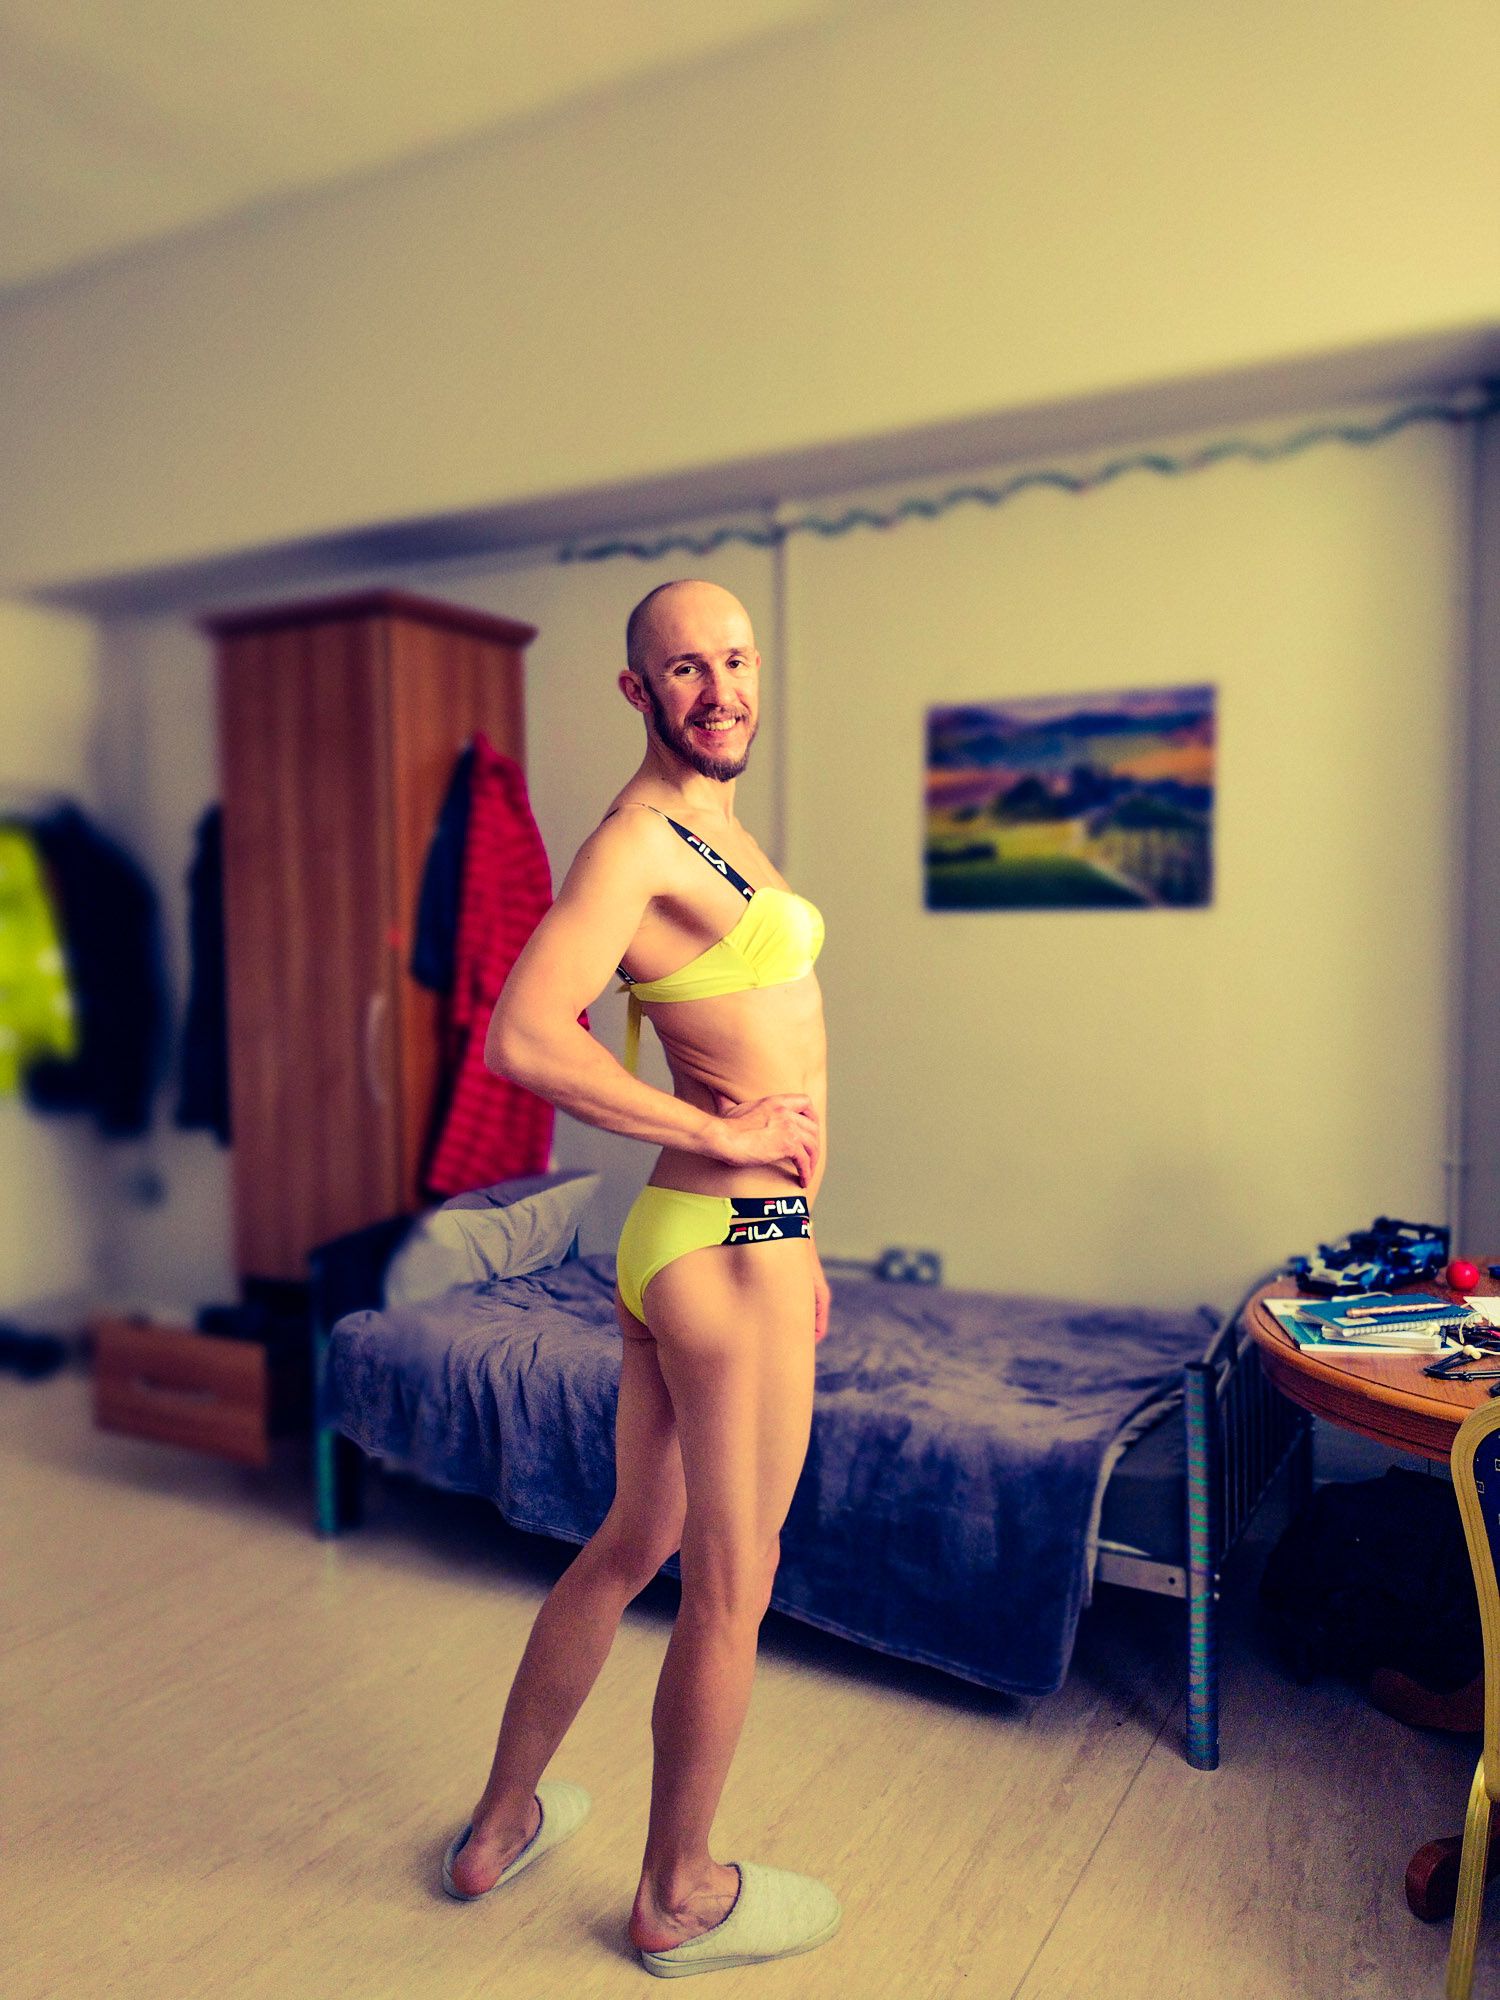 Bearded athletic man posing in yellow swimsuit  #21